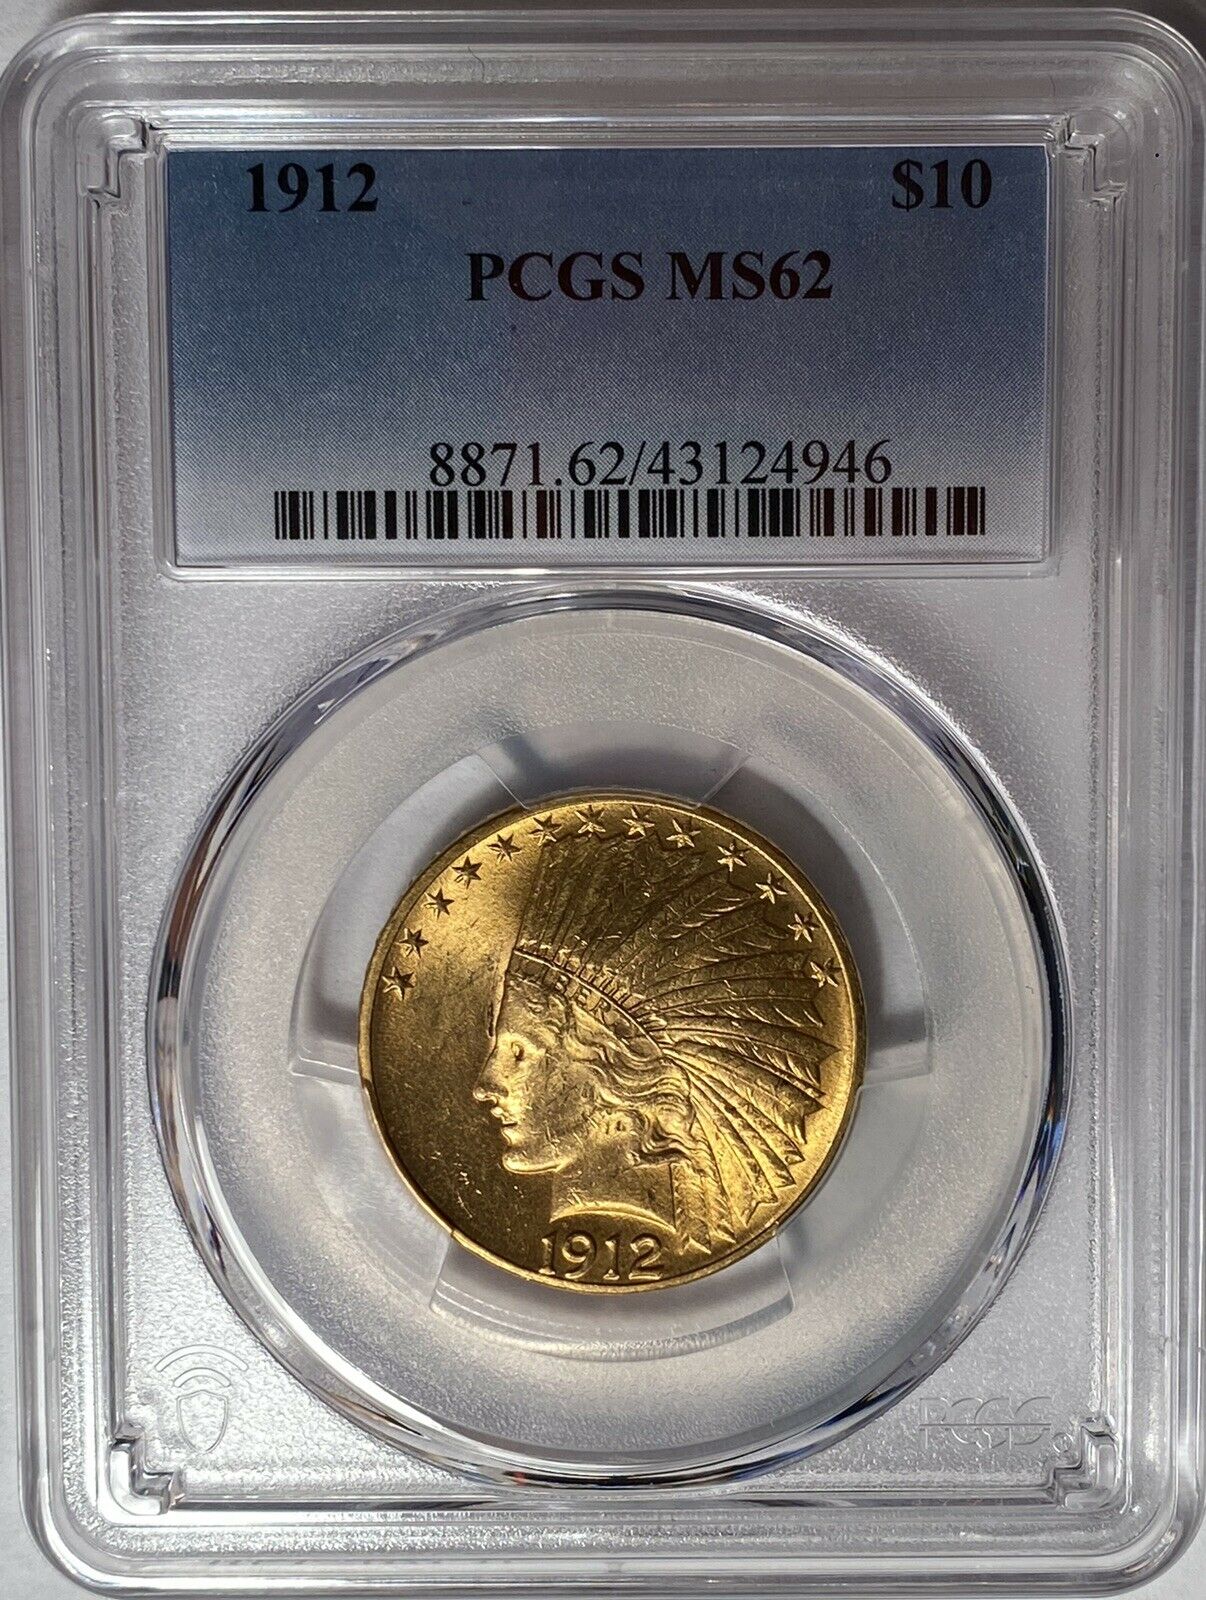 1912 $10 Indian Gold Eagle Pcgs Ms62 — Great Luster!!